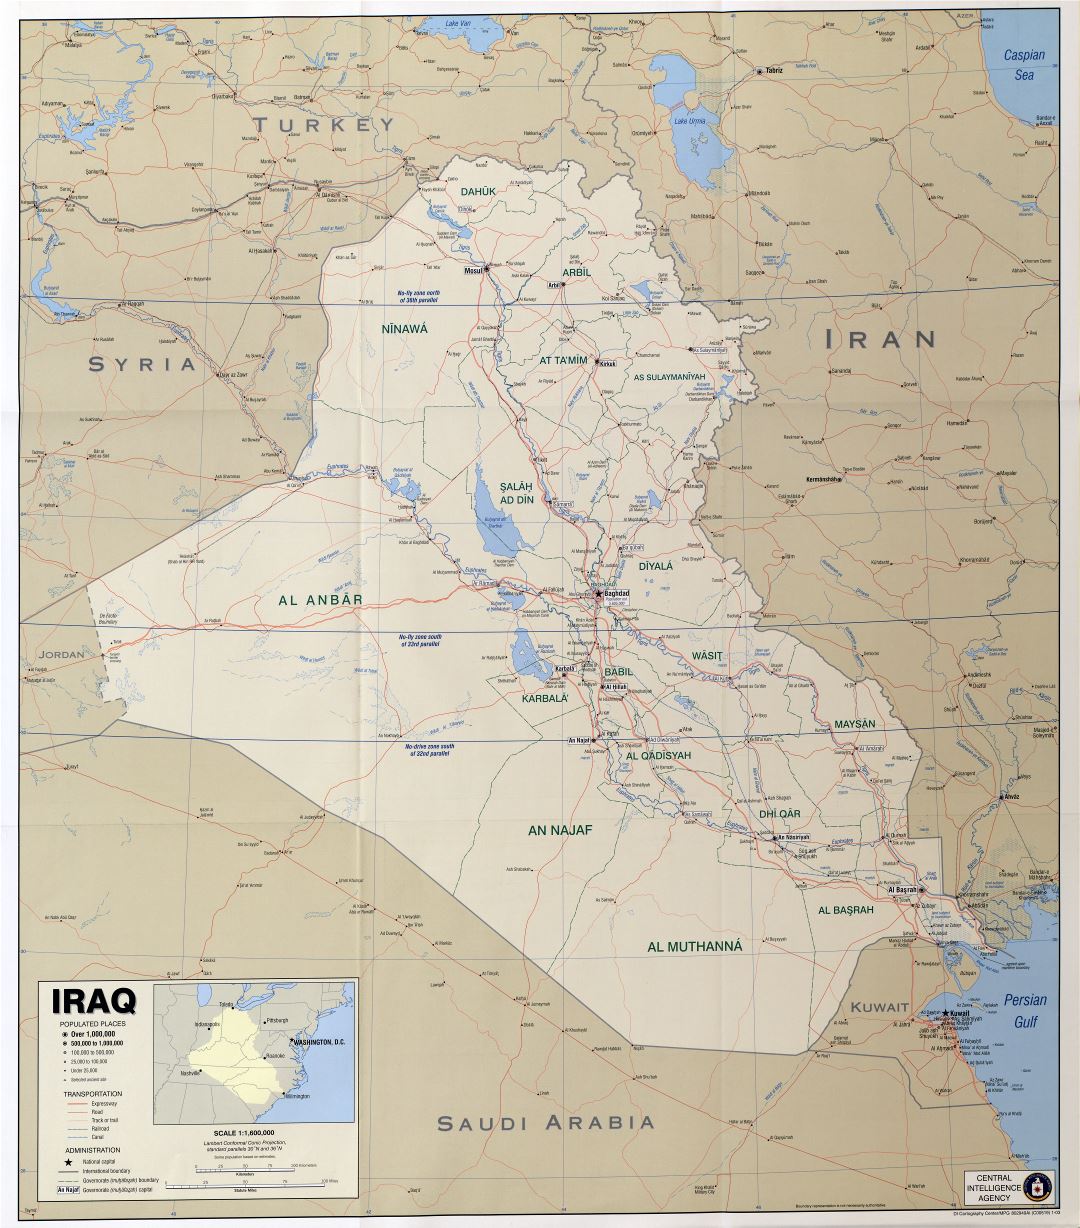 Large scale political map of Iraq with other marks - 2003